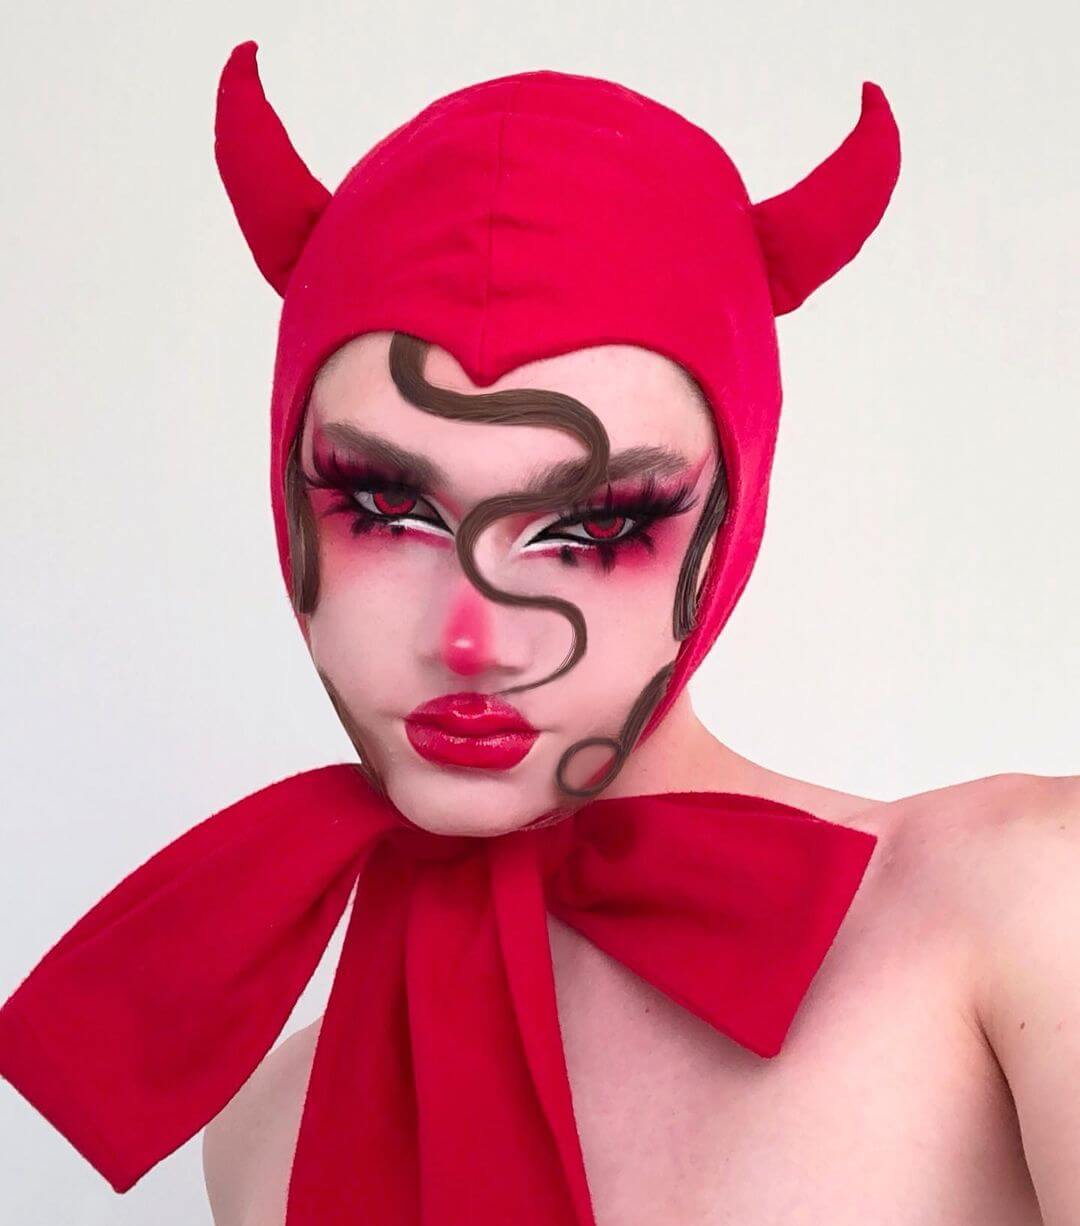 Women's Halloween Makeup And the vintage Halloween devil makes an appearance!